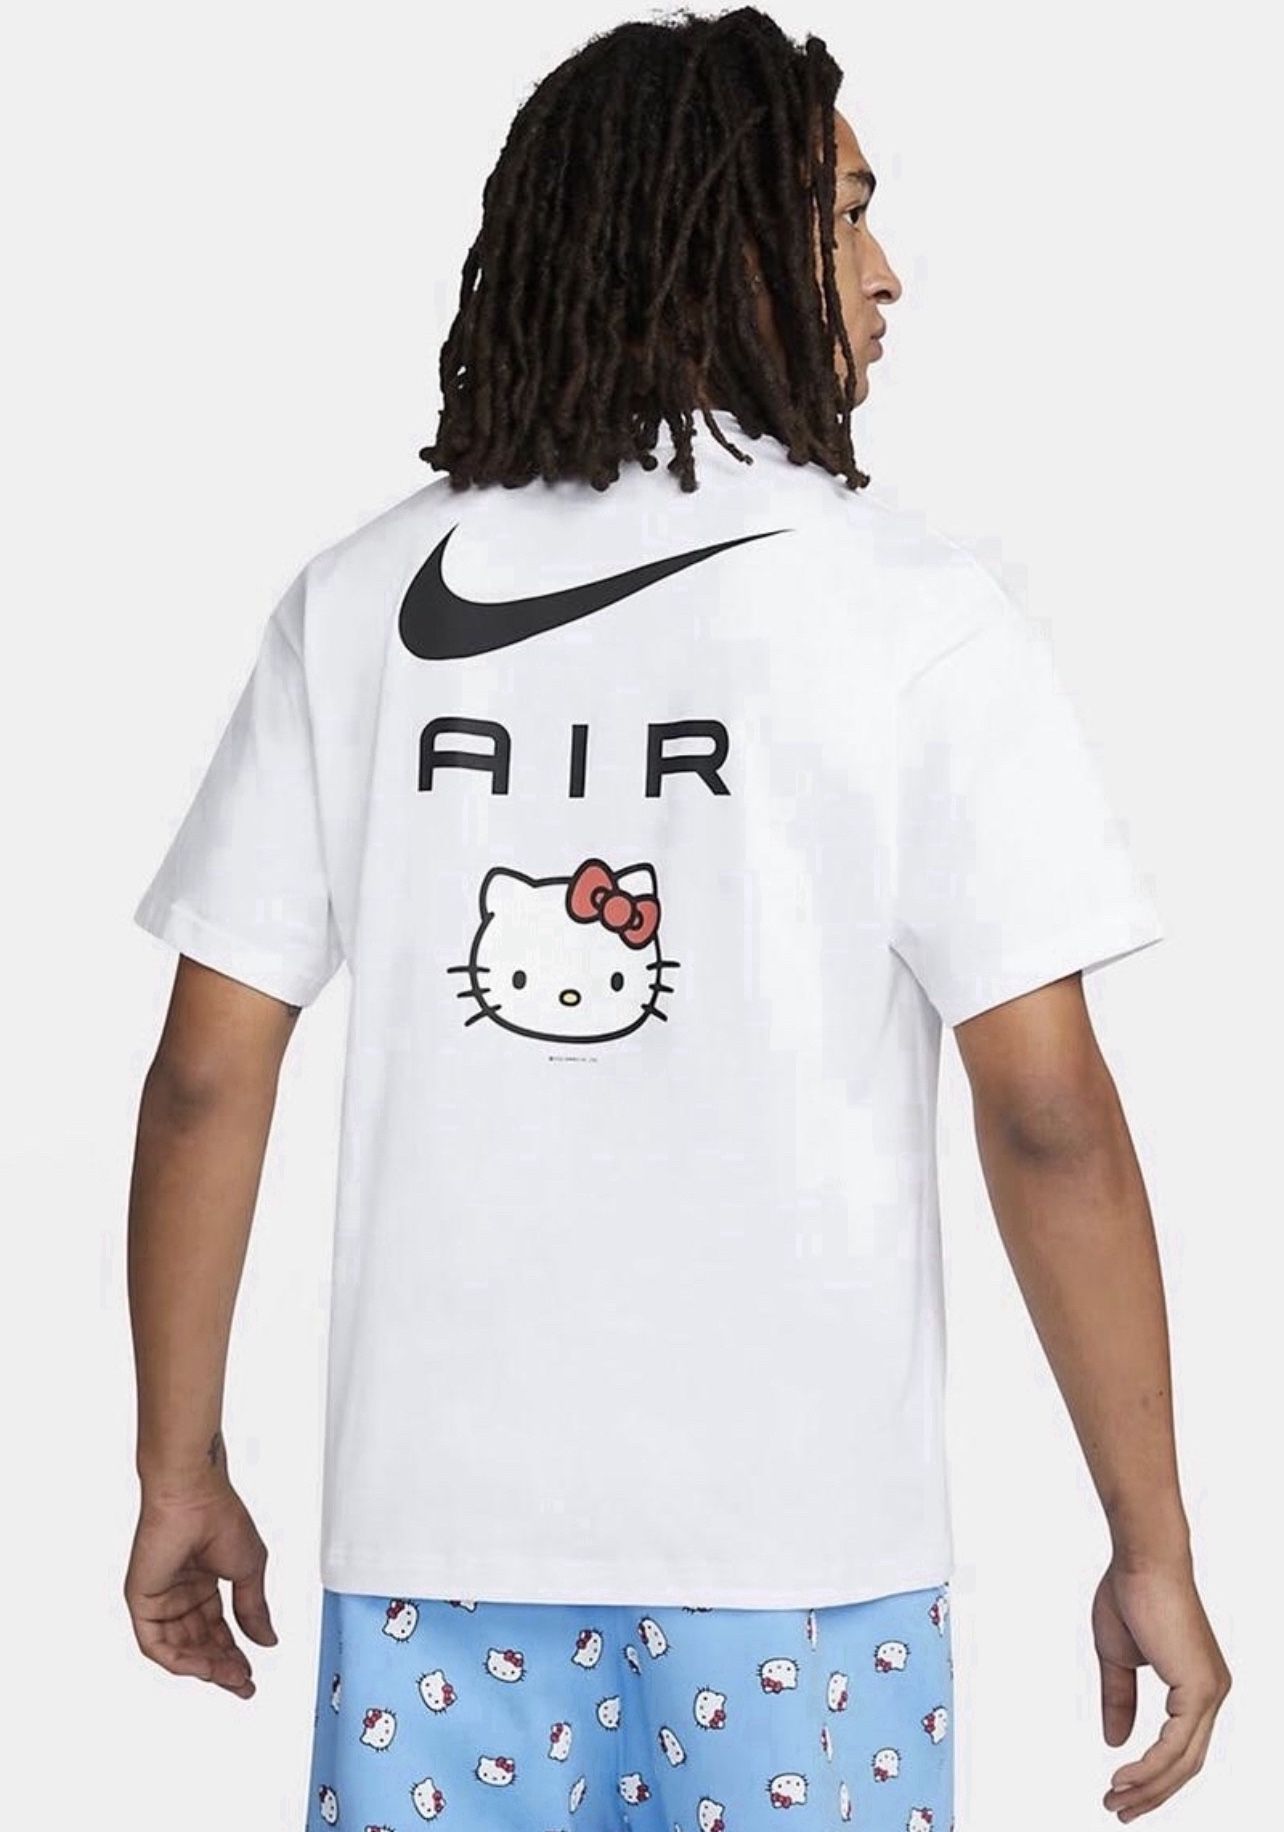 Nike x Hello Kitty T-Shirt Size: Large Only 